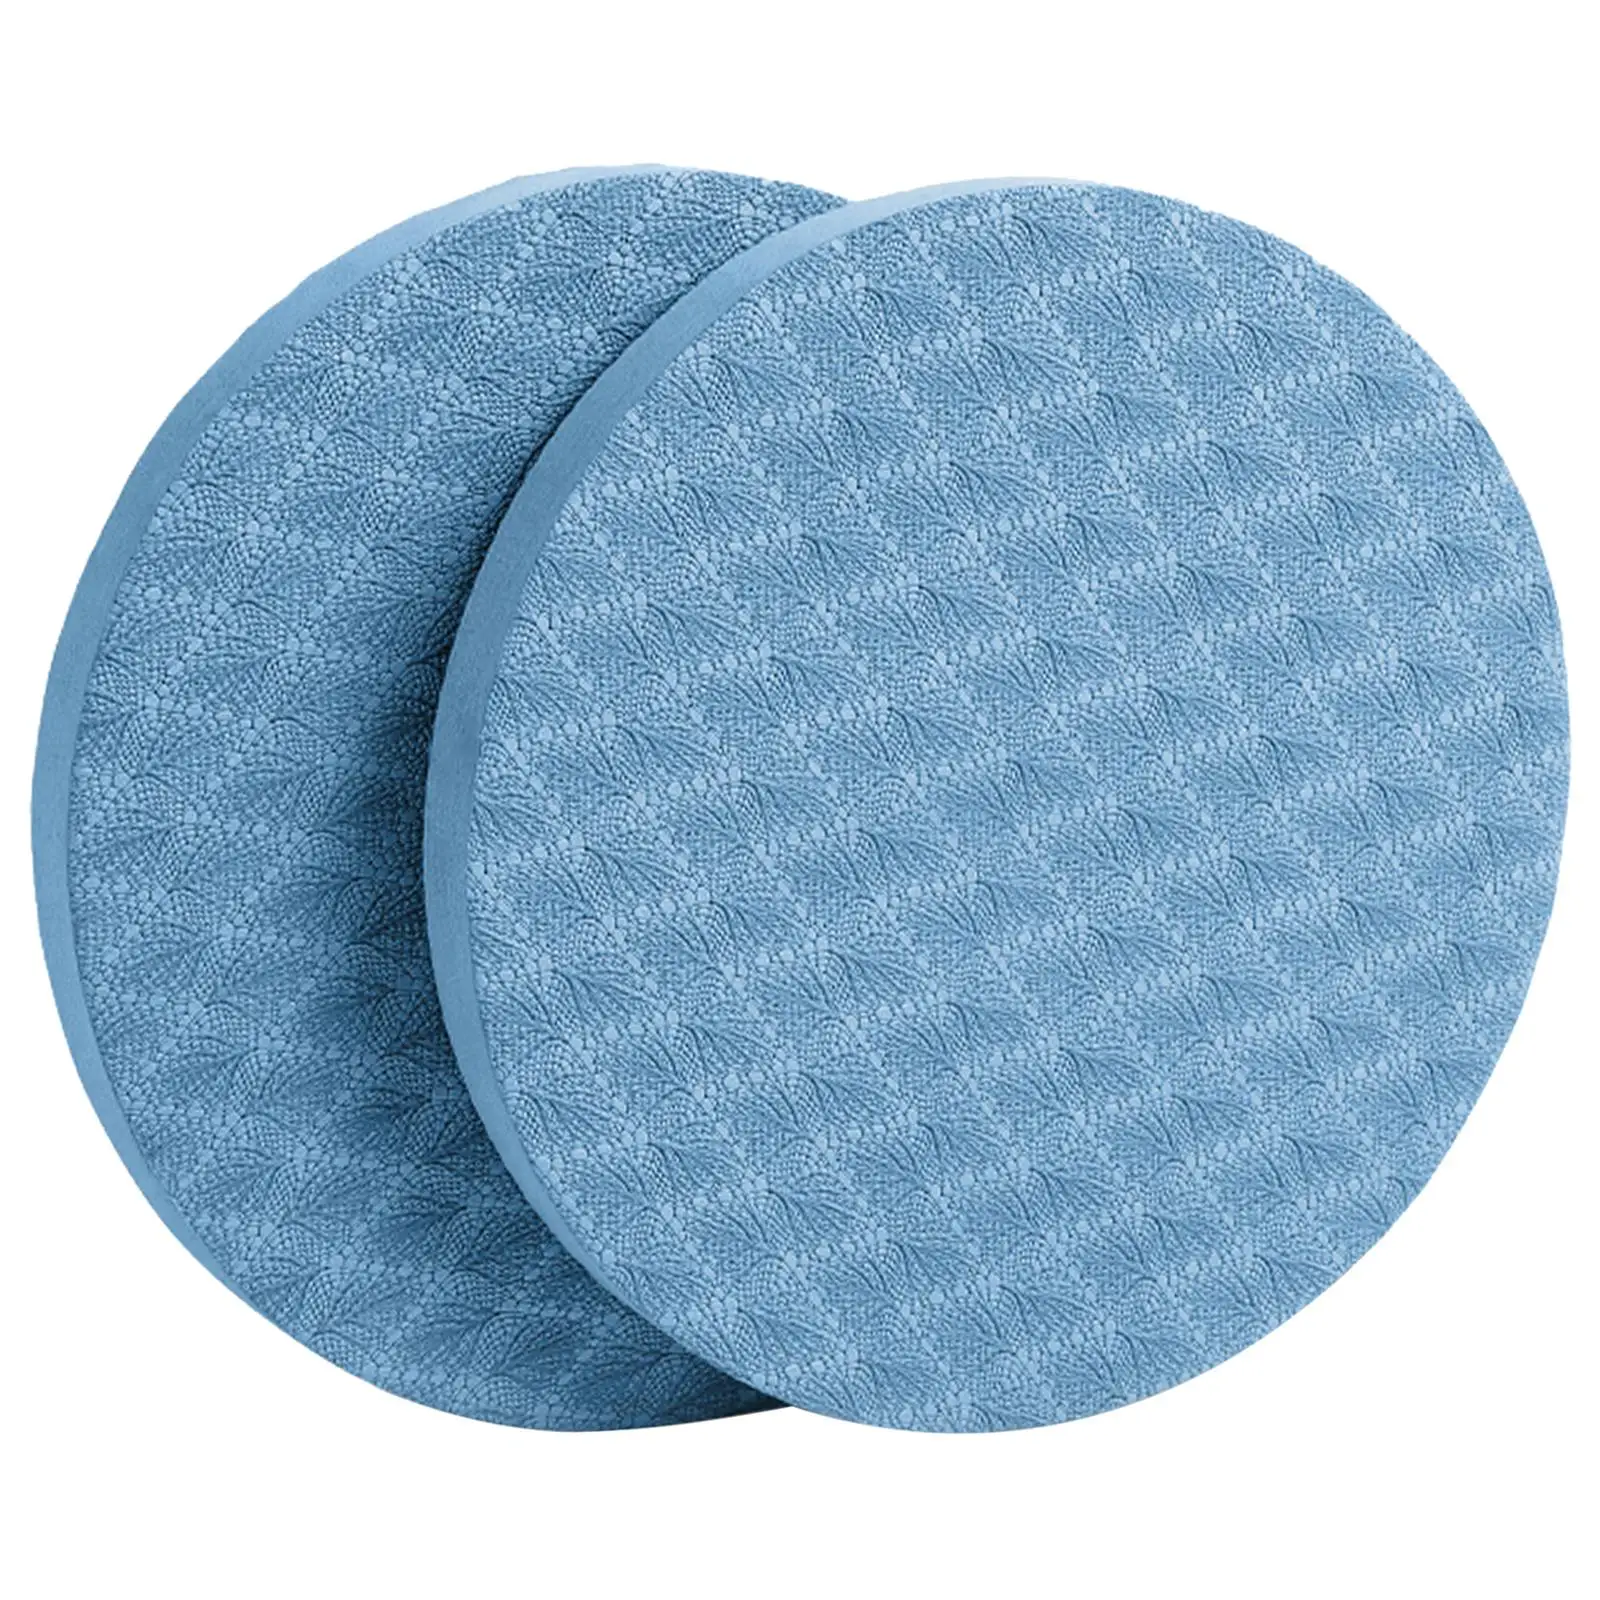 Anti Slip Round Yoga Mat 1 Pair Exercise Slider Physical Strength Training 15mm Thick Knee Ankle Pad for Fitness Outdoor